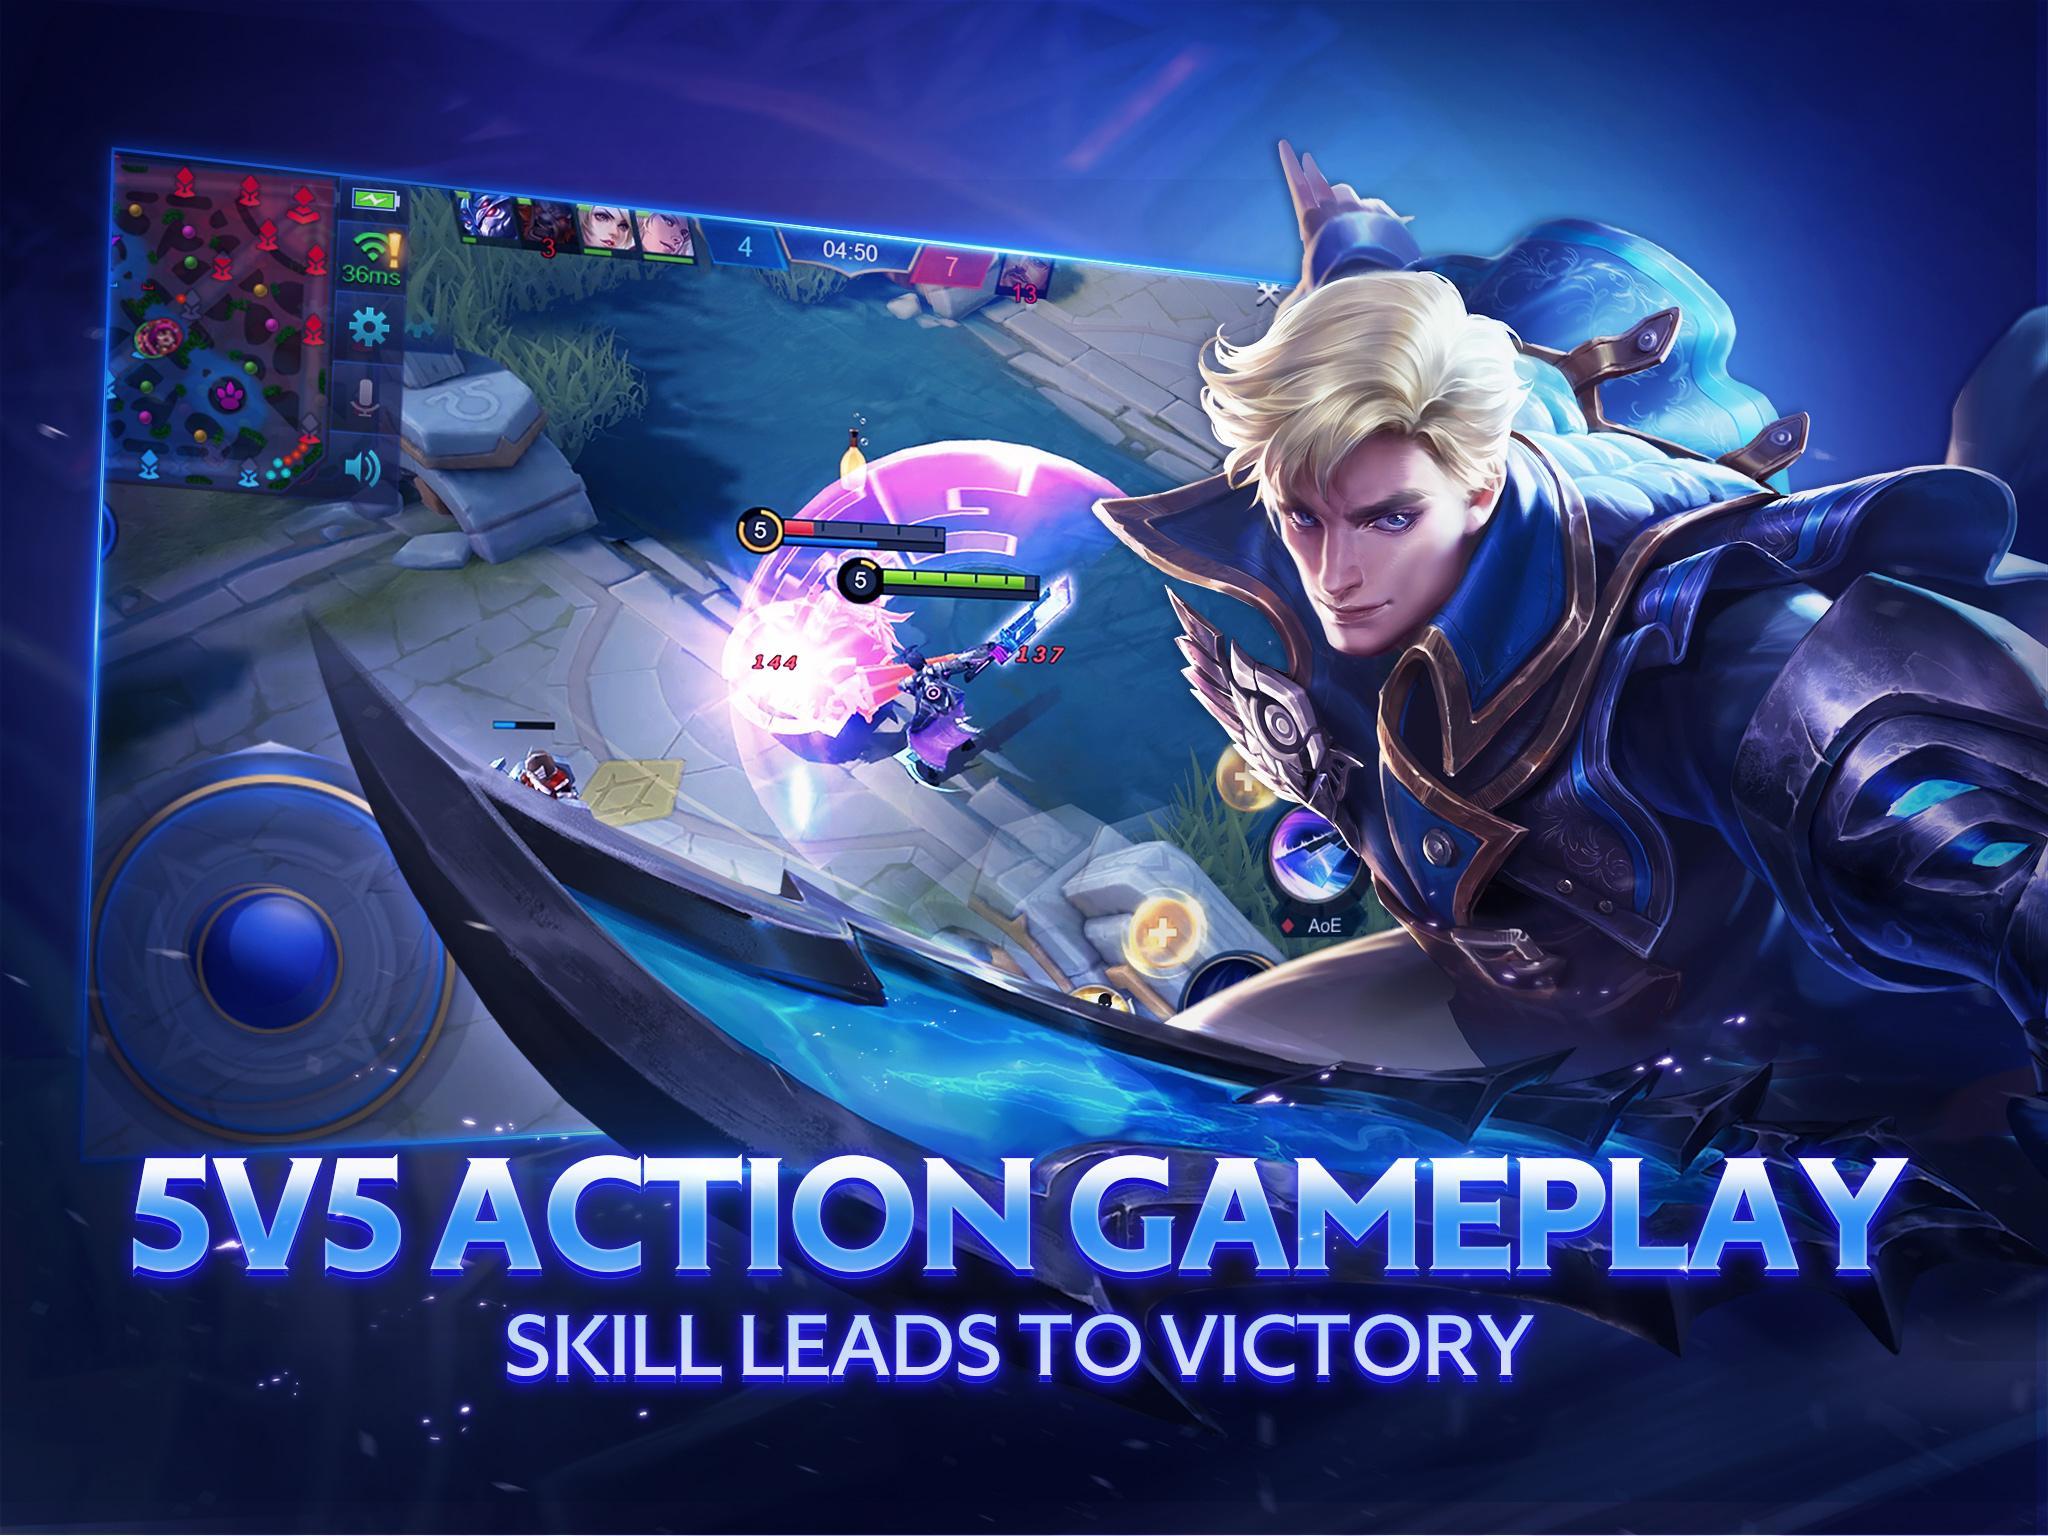 Www free action games download for mobile com free